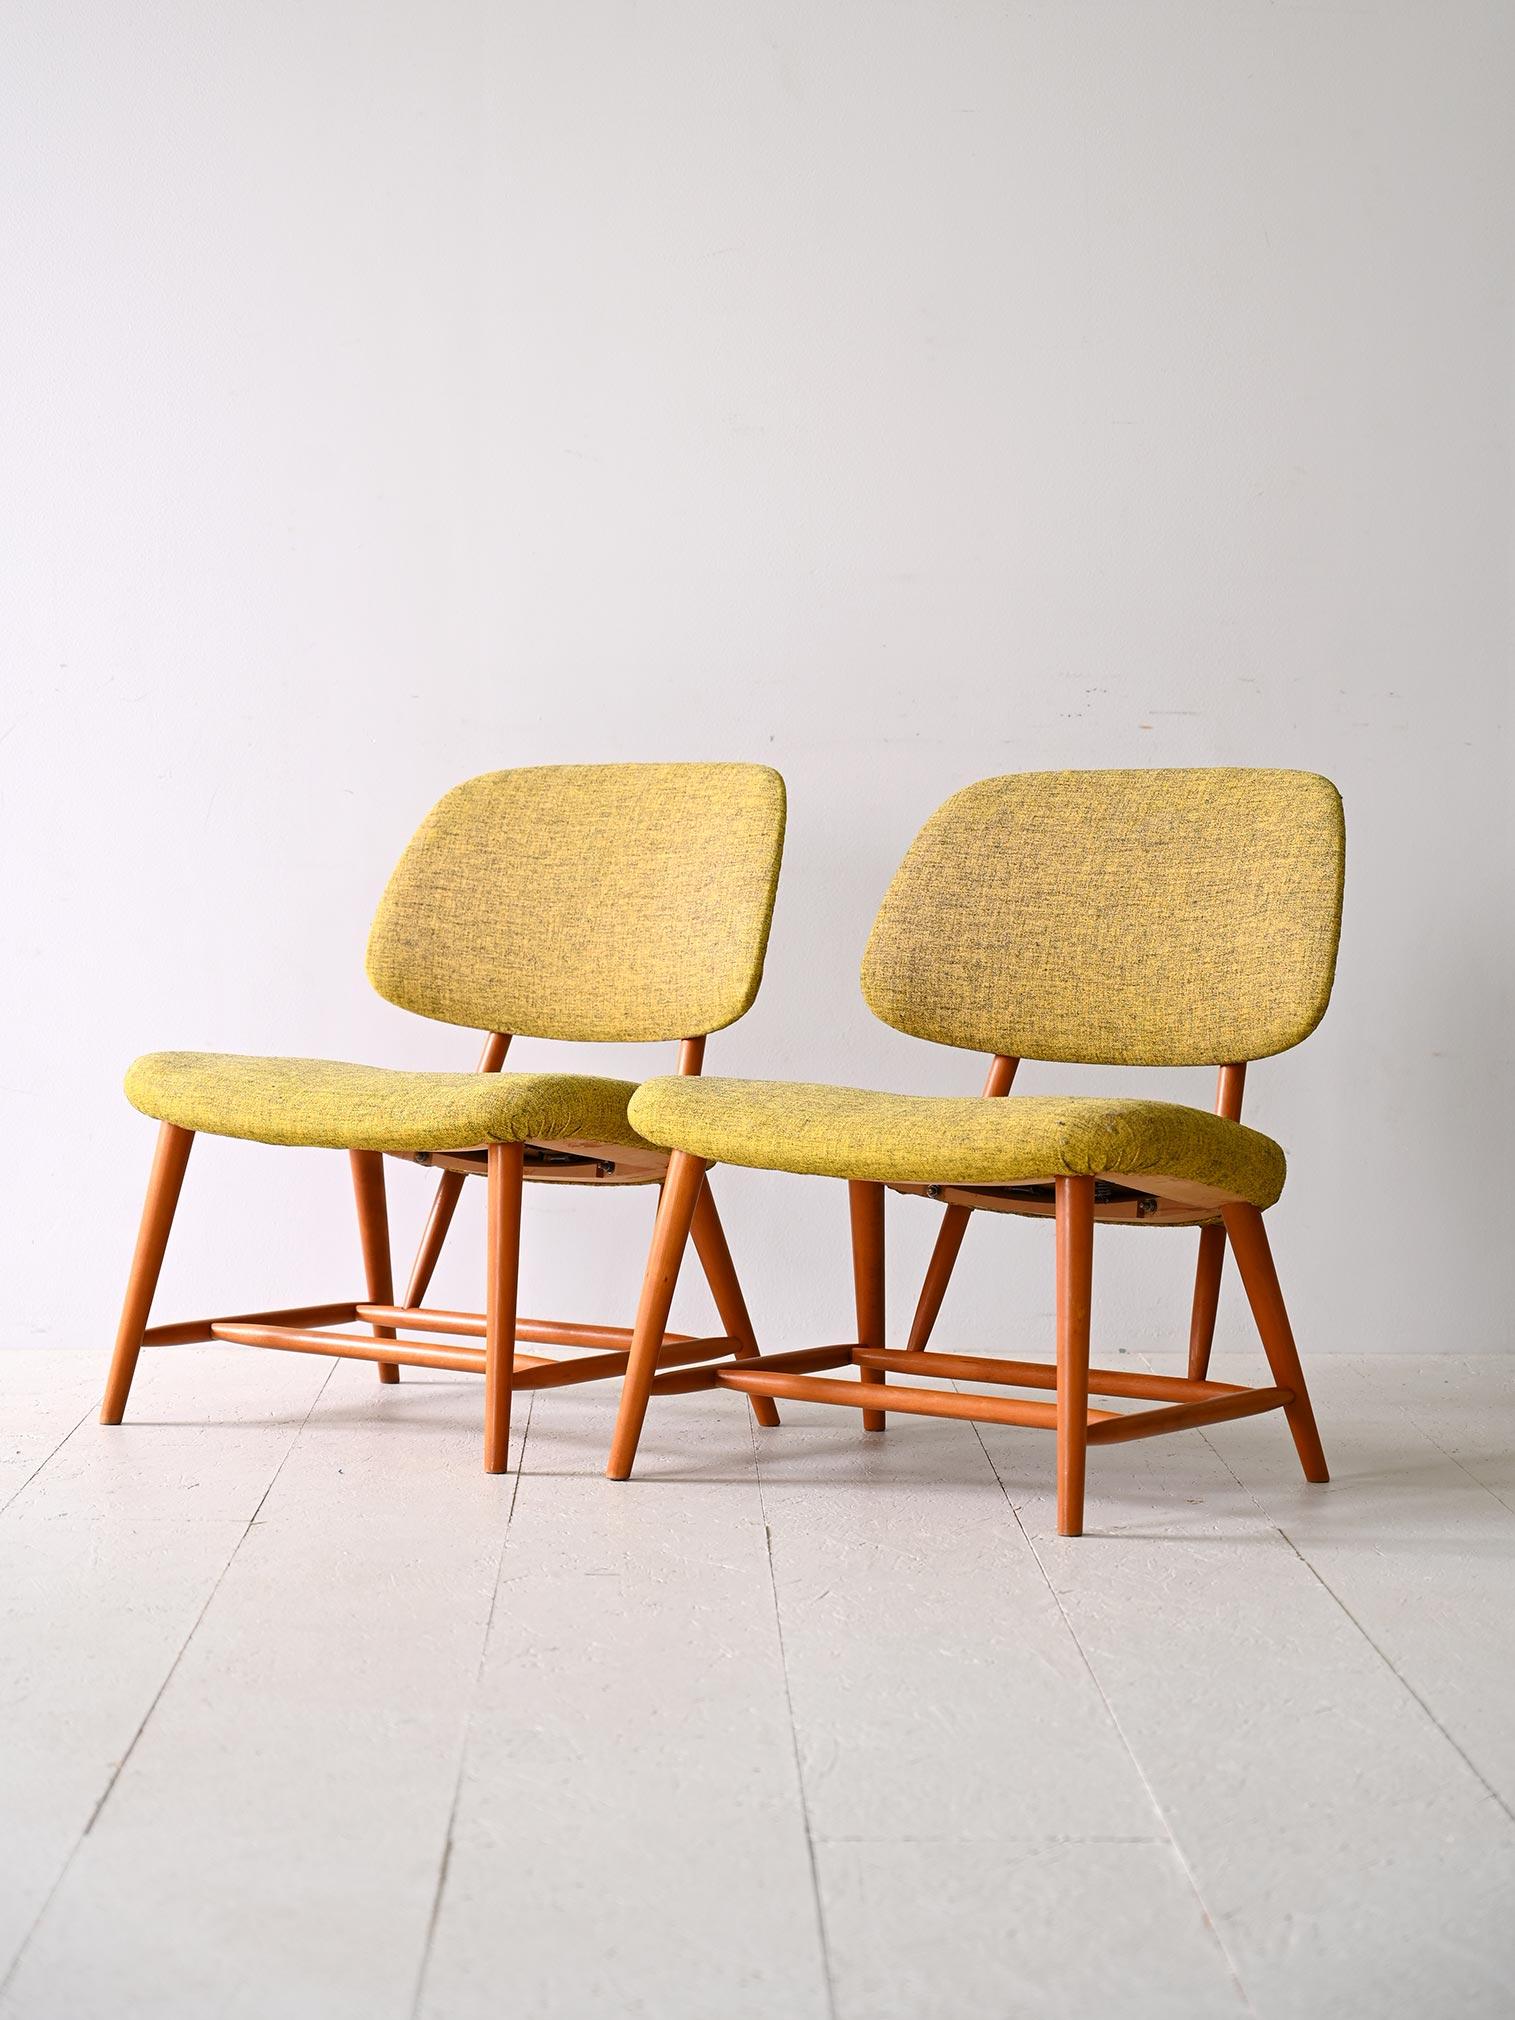 This pair of vintage Scandinavian 'TeVe' or 'TV Chairs' were designed by Alf Svensson, (there is a stamp of authenticity present under the seat).

The solid frame is made of beech wood and has tapered legs, while the seat is delicately upholstered